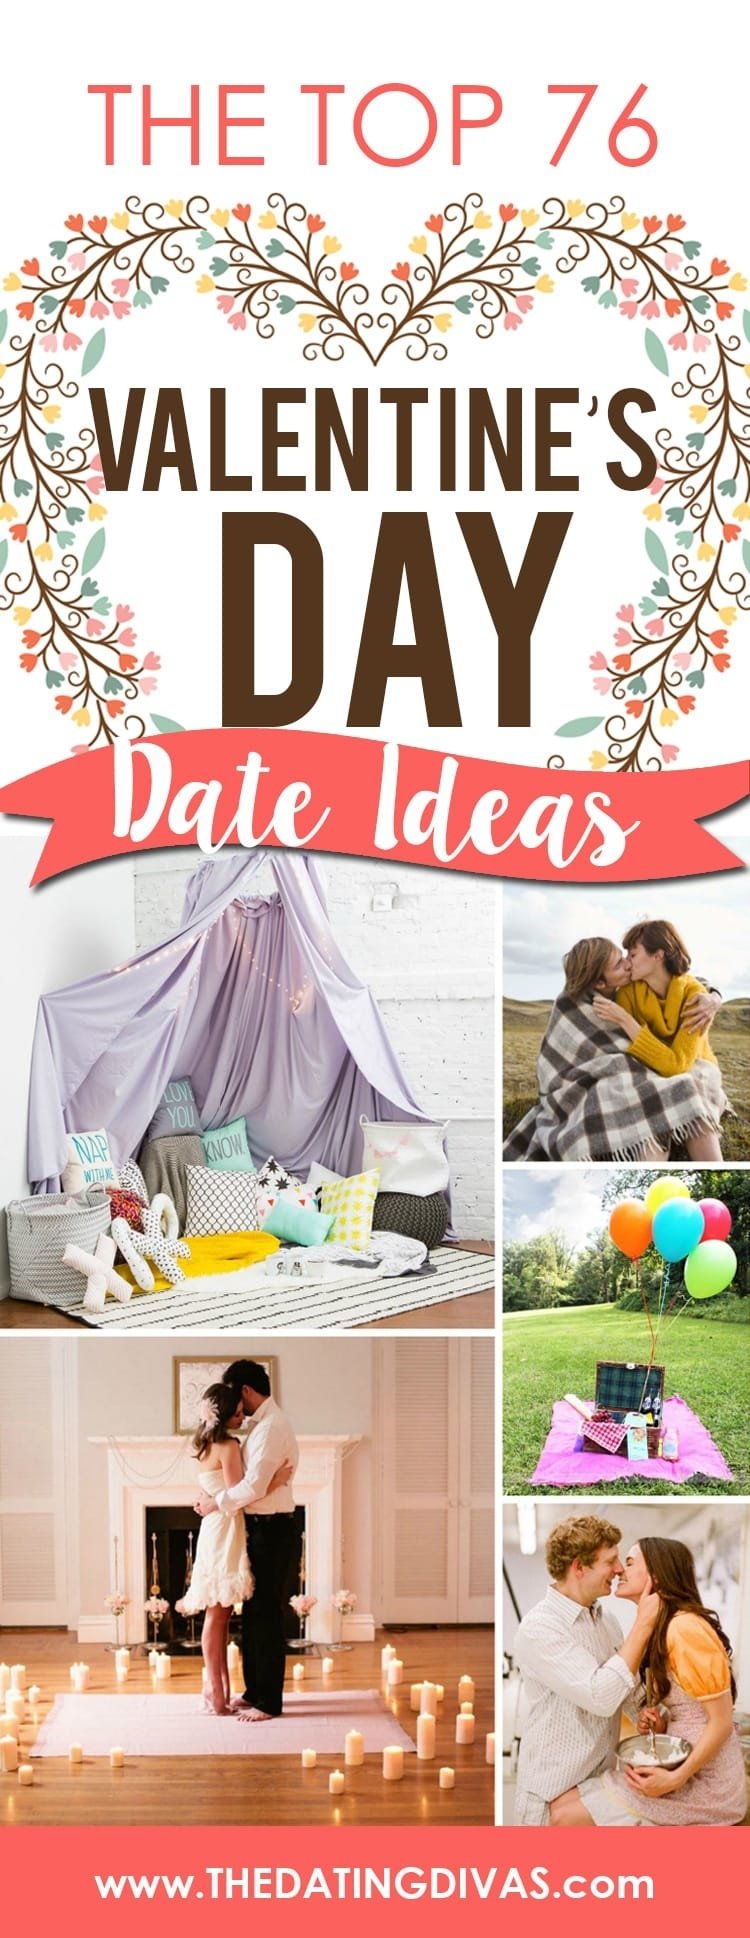 10 Gorgeous Fun Date Ideas Valentines Day the top 76 valentines day date ideas from the dating divas 9 2022